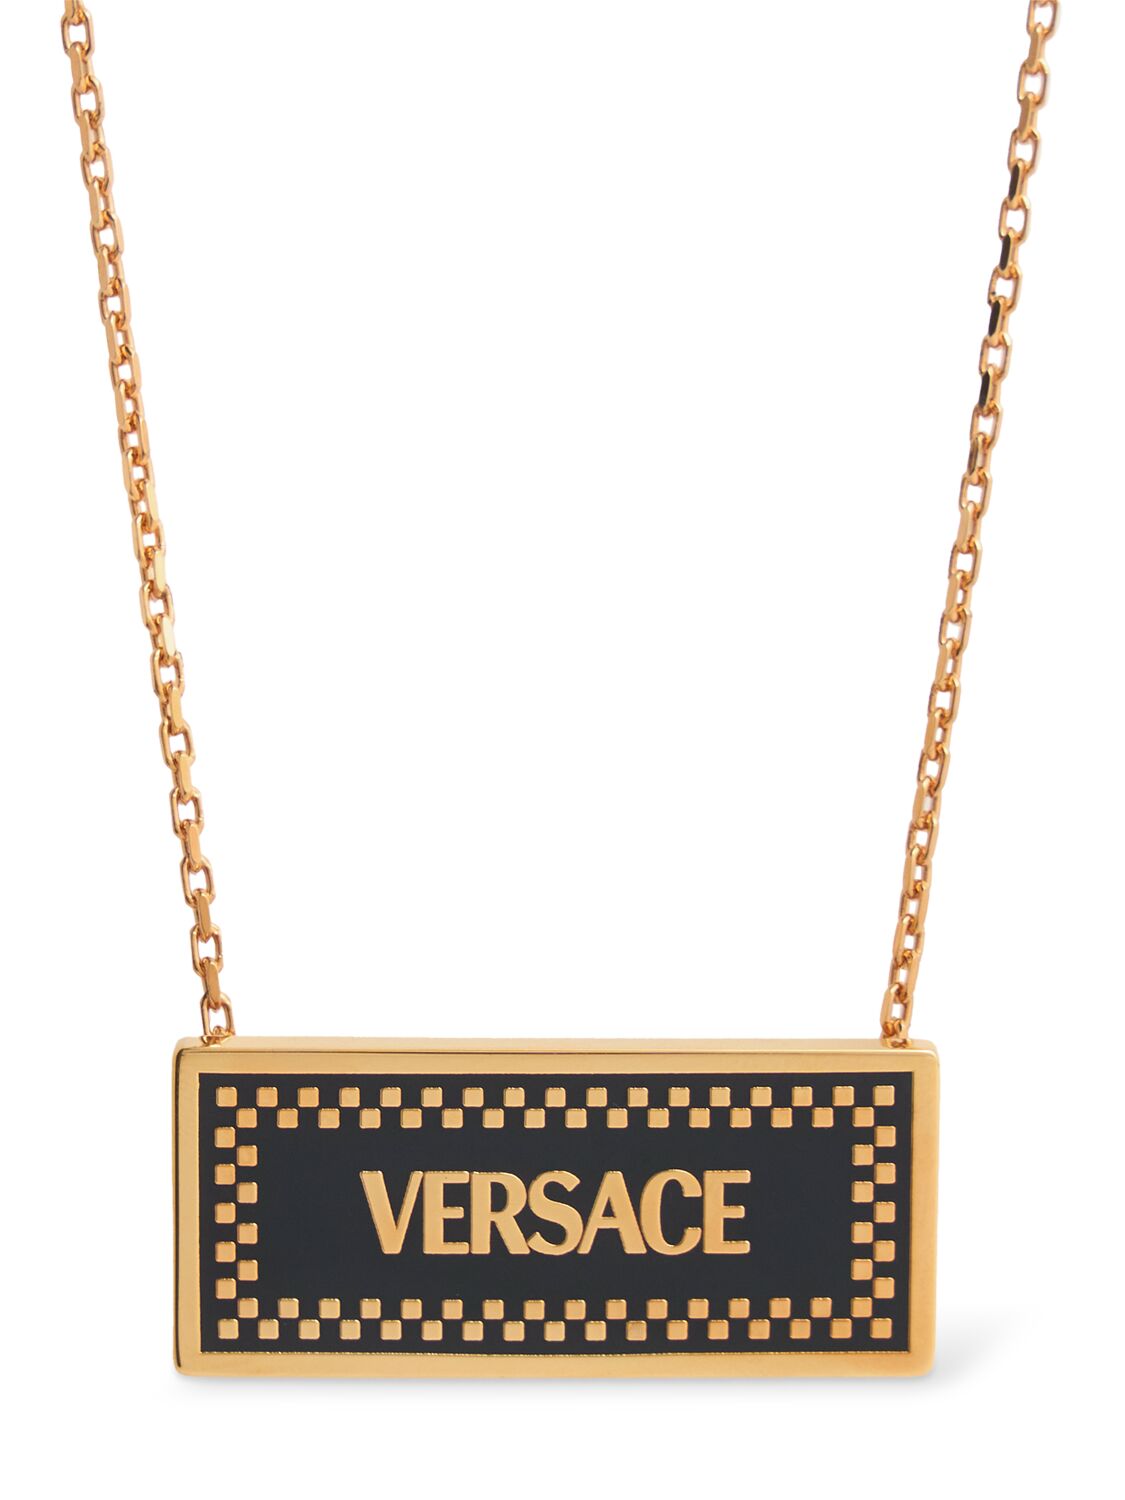 Versace Enameled Metal Logo Necklace In Gold